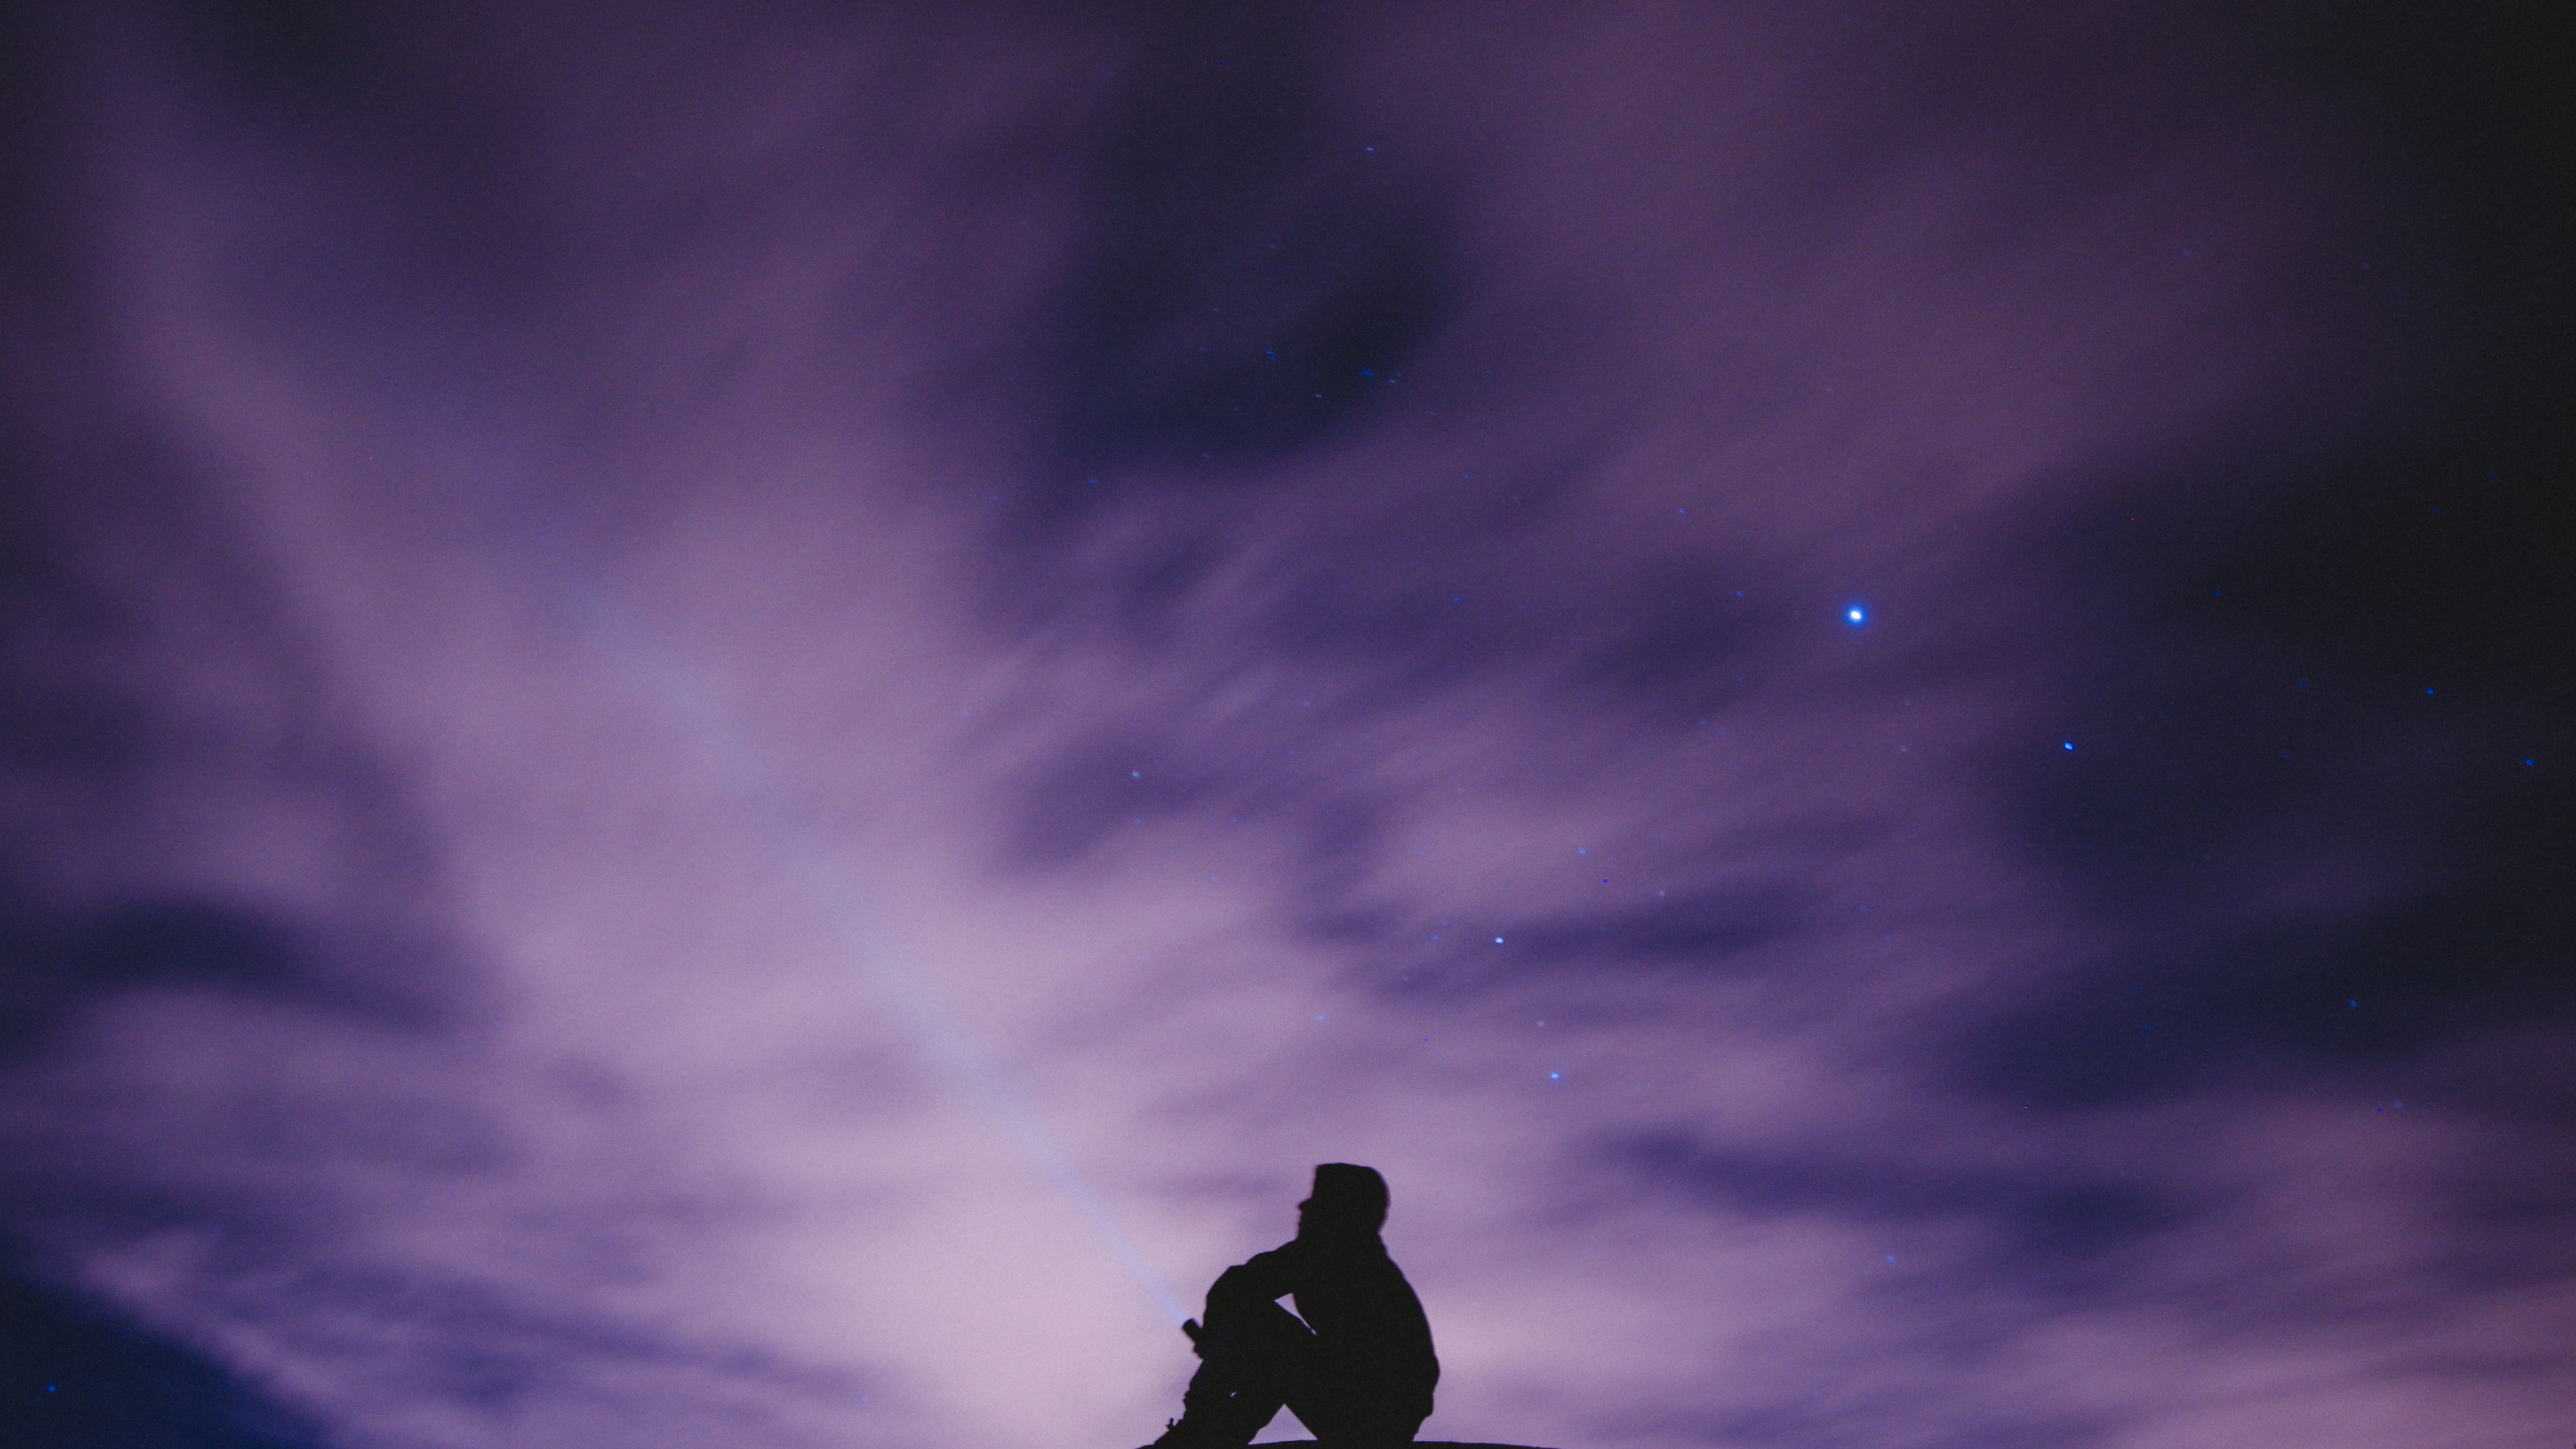 Silhouette of Man and Woman Under Dark Sky. Wallpaper in 3840x2160 Resolution